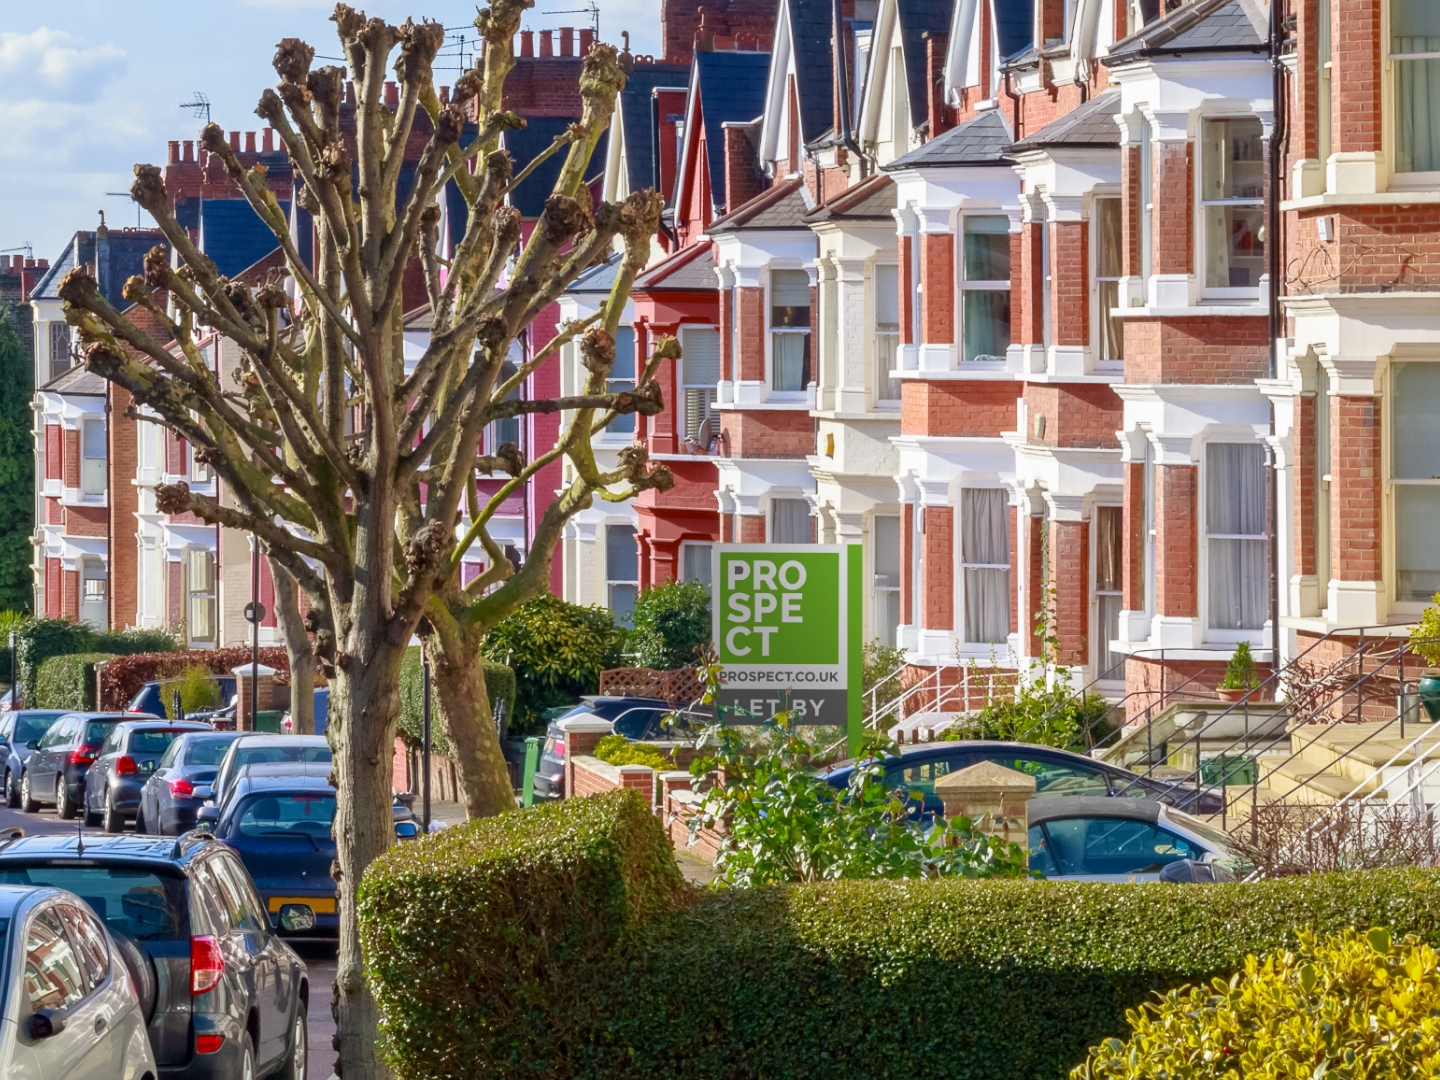 Property Market Insight: Q2 - The Positives and Opportunities